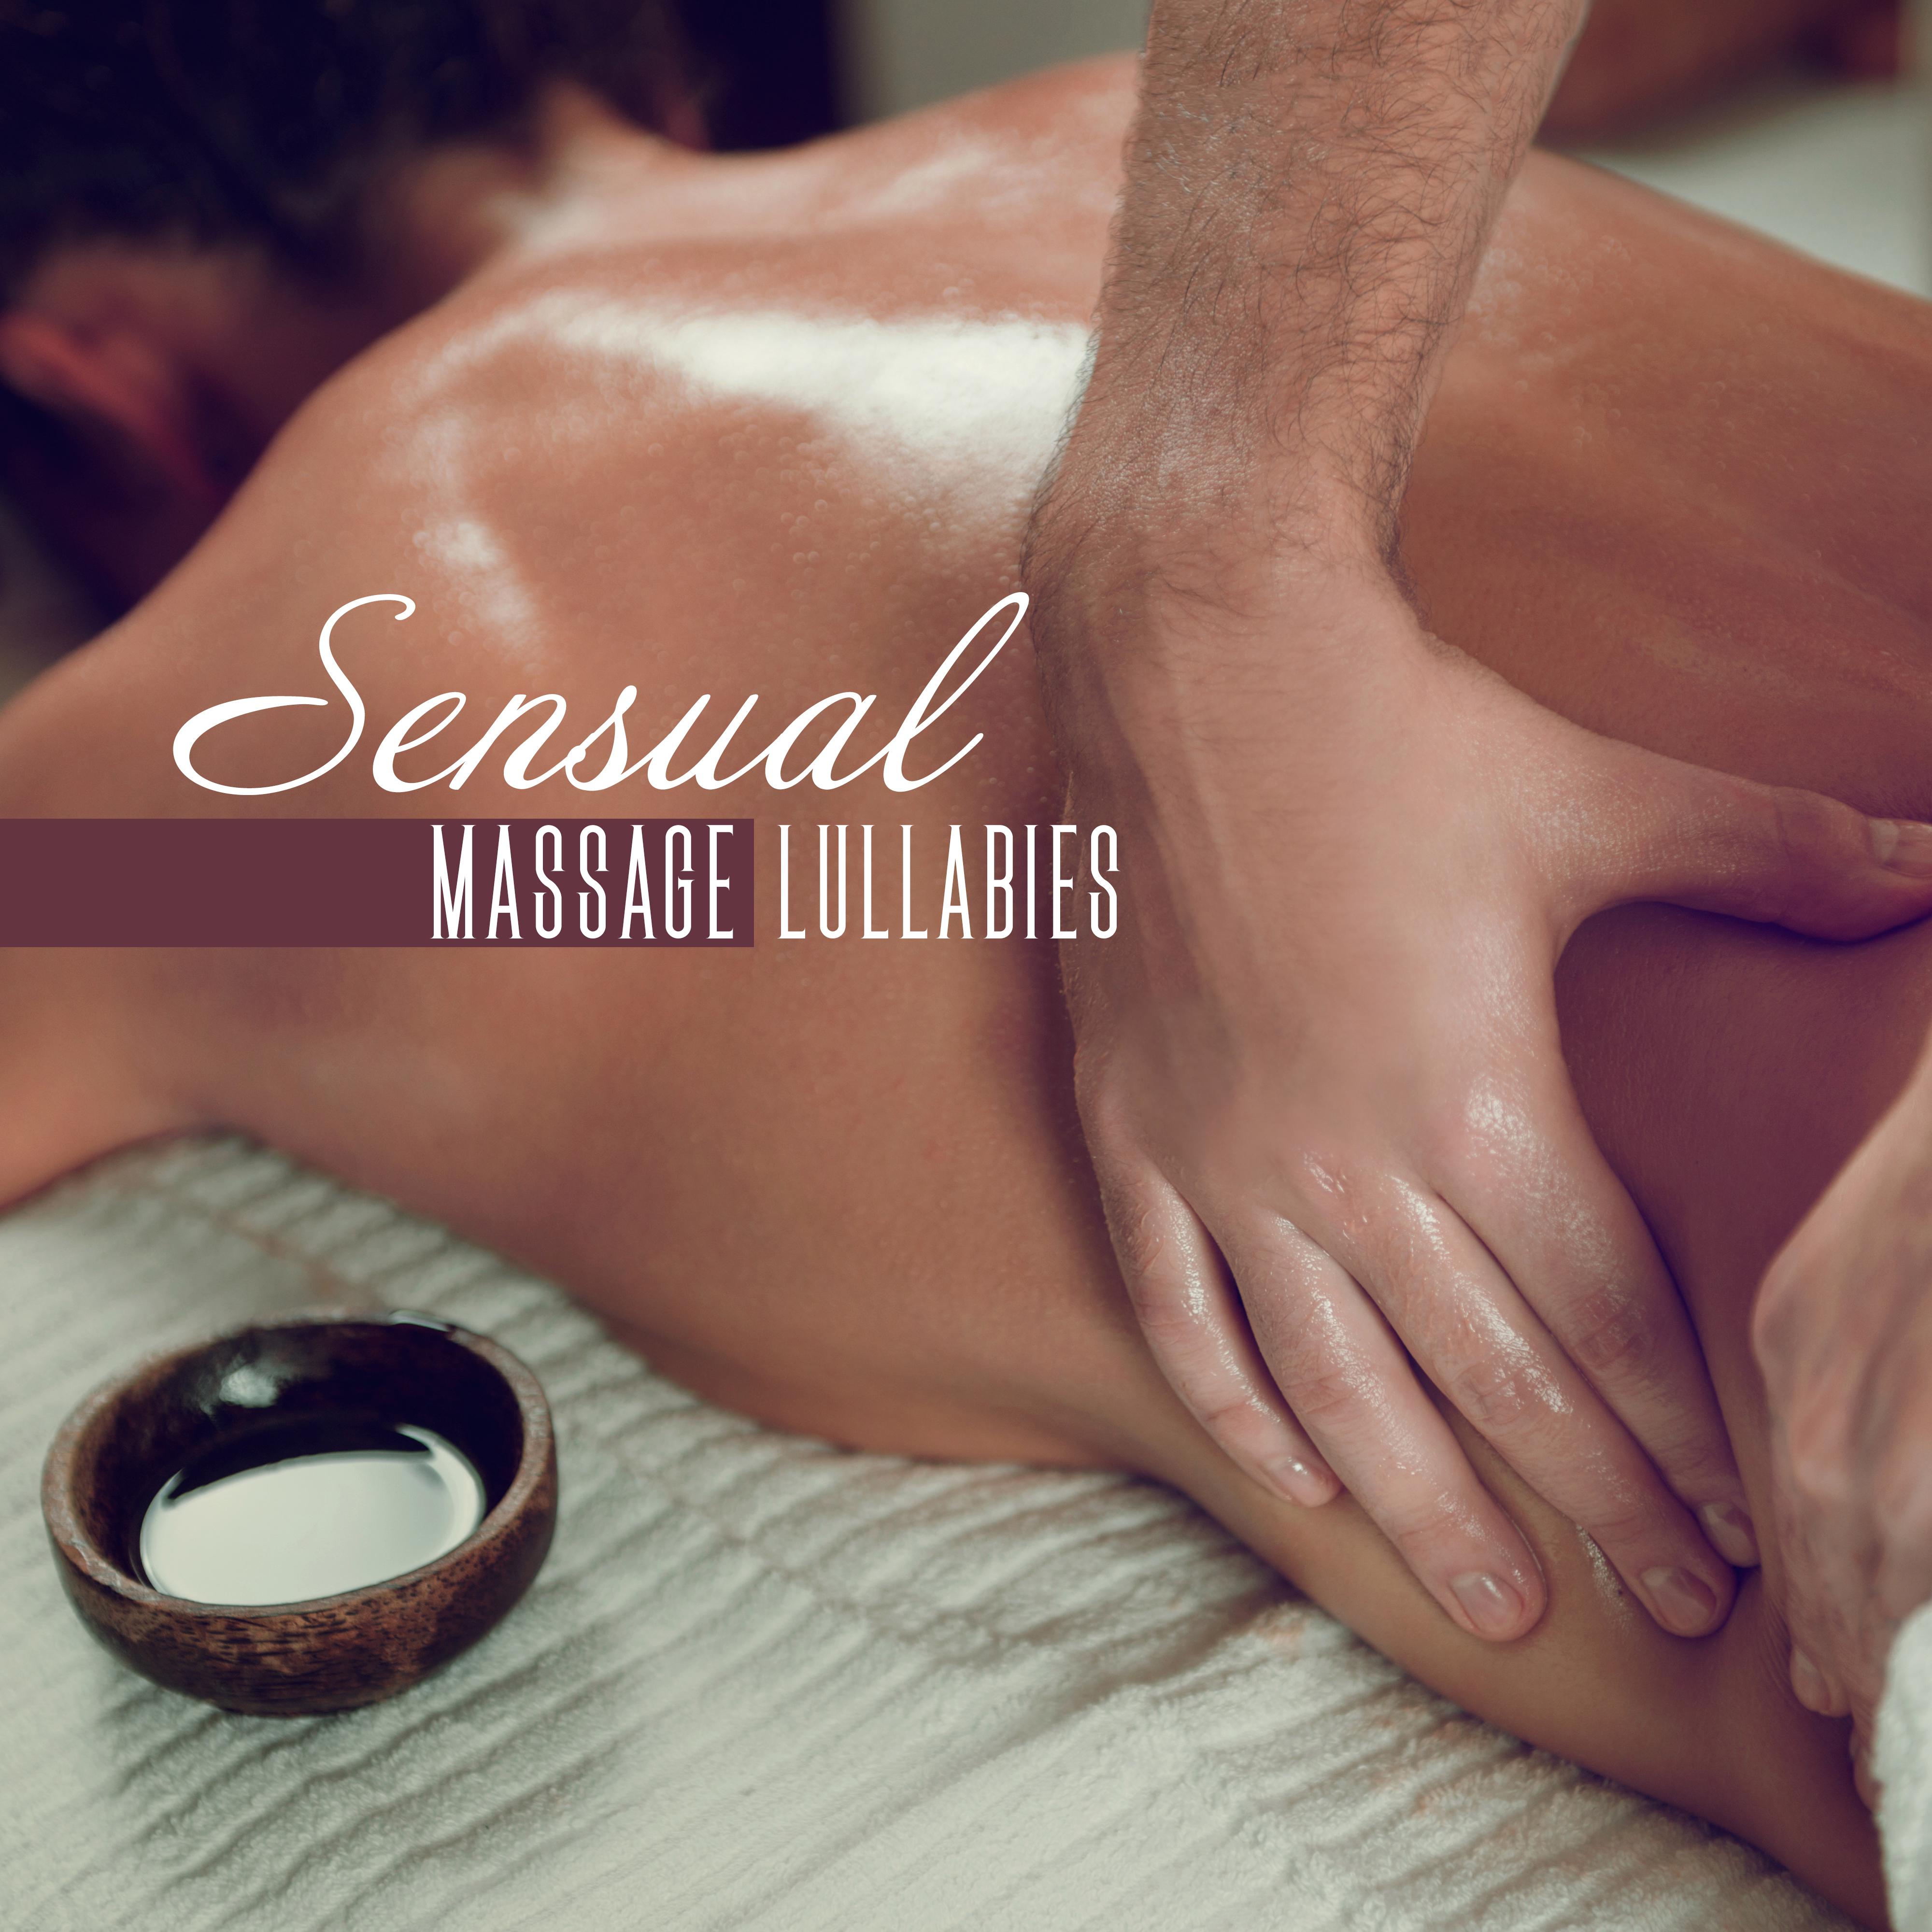 Sensual Massage Lullabies: New Age 2019 Music Compilation, Nature Sounds of Water, Forest & Birds, Piano & Guitar Soft Melodies, Spa & Wellness Perfect Background Songs